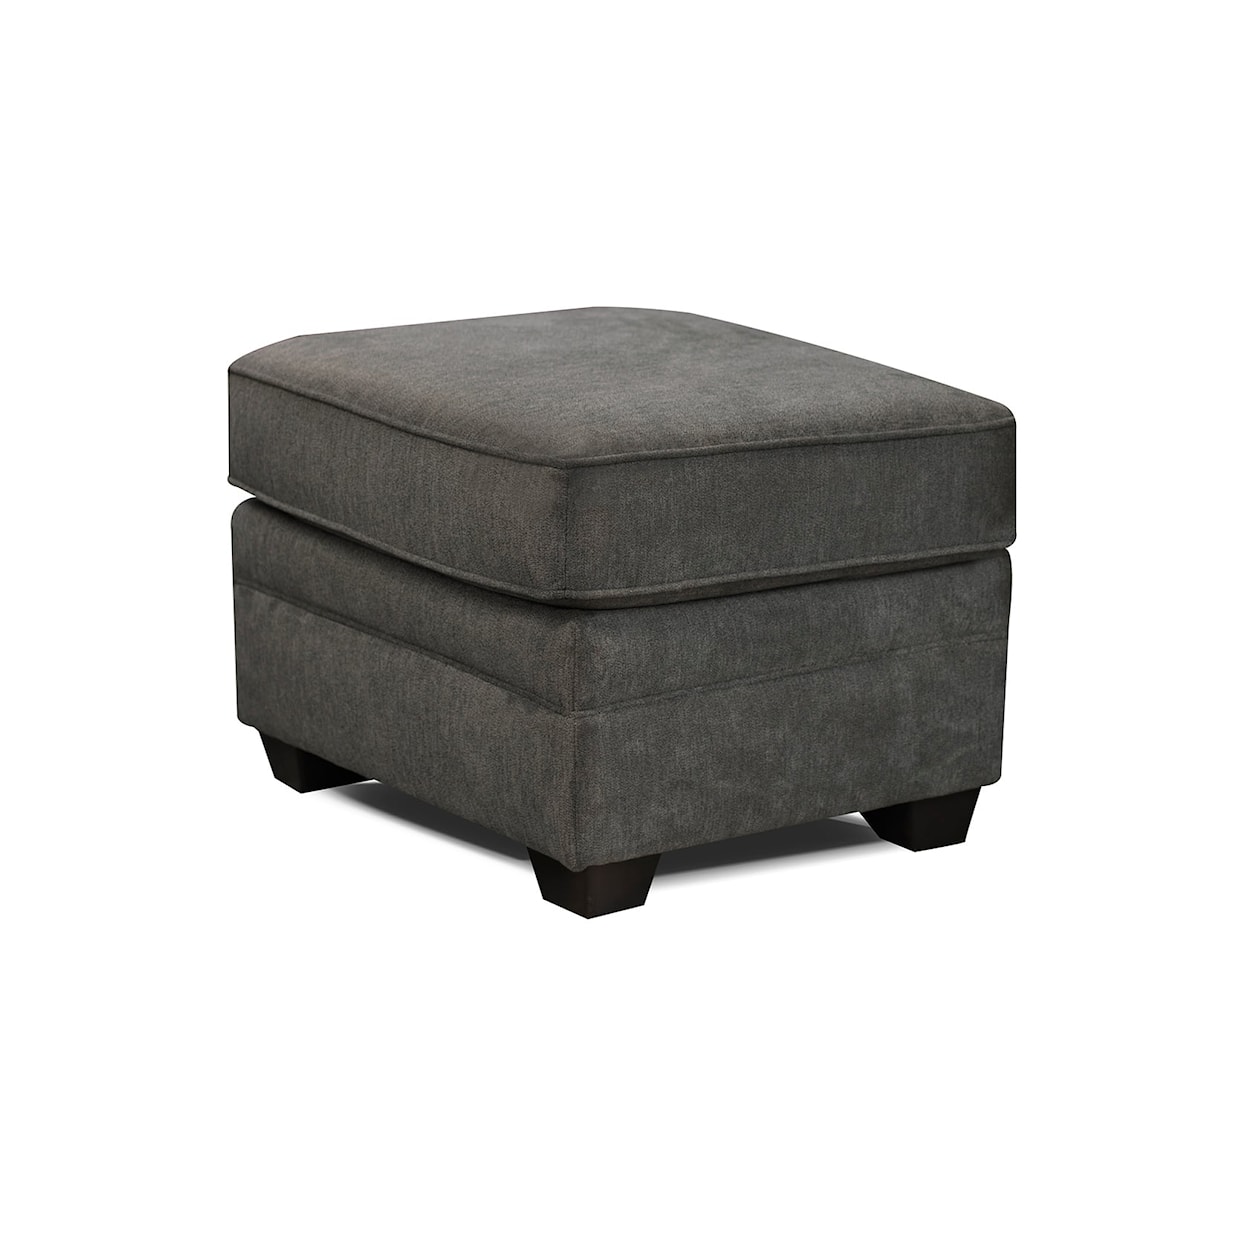 Dimensions England Welted Ottoman